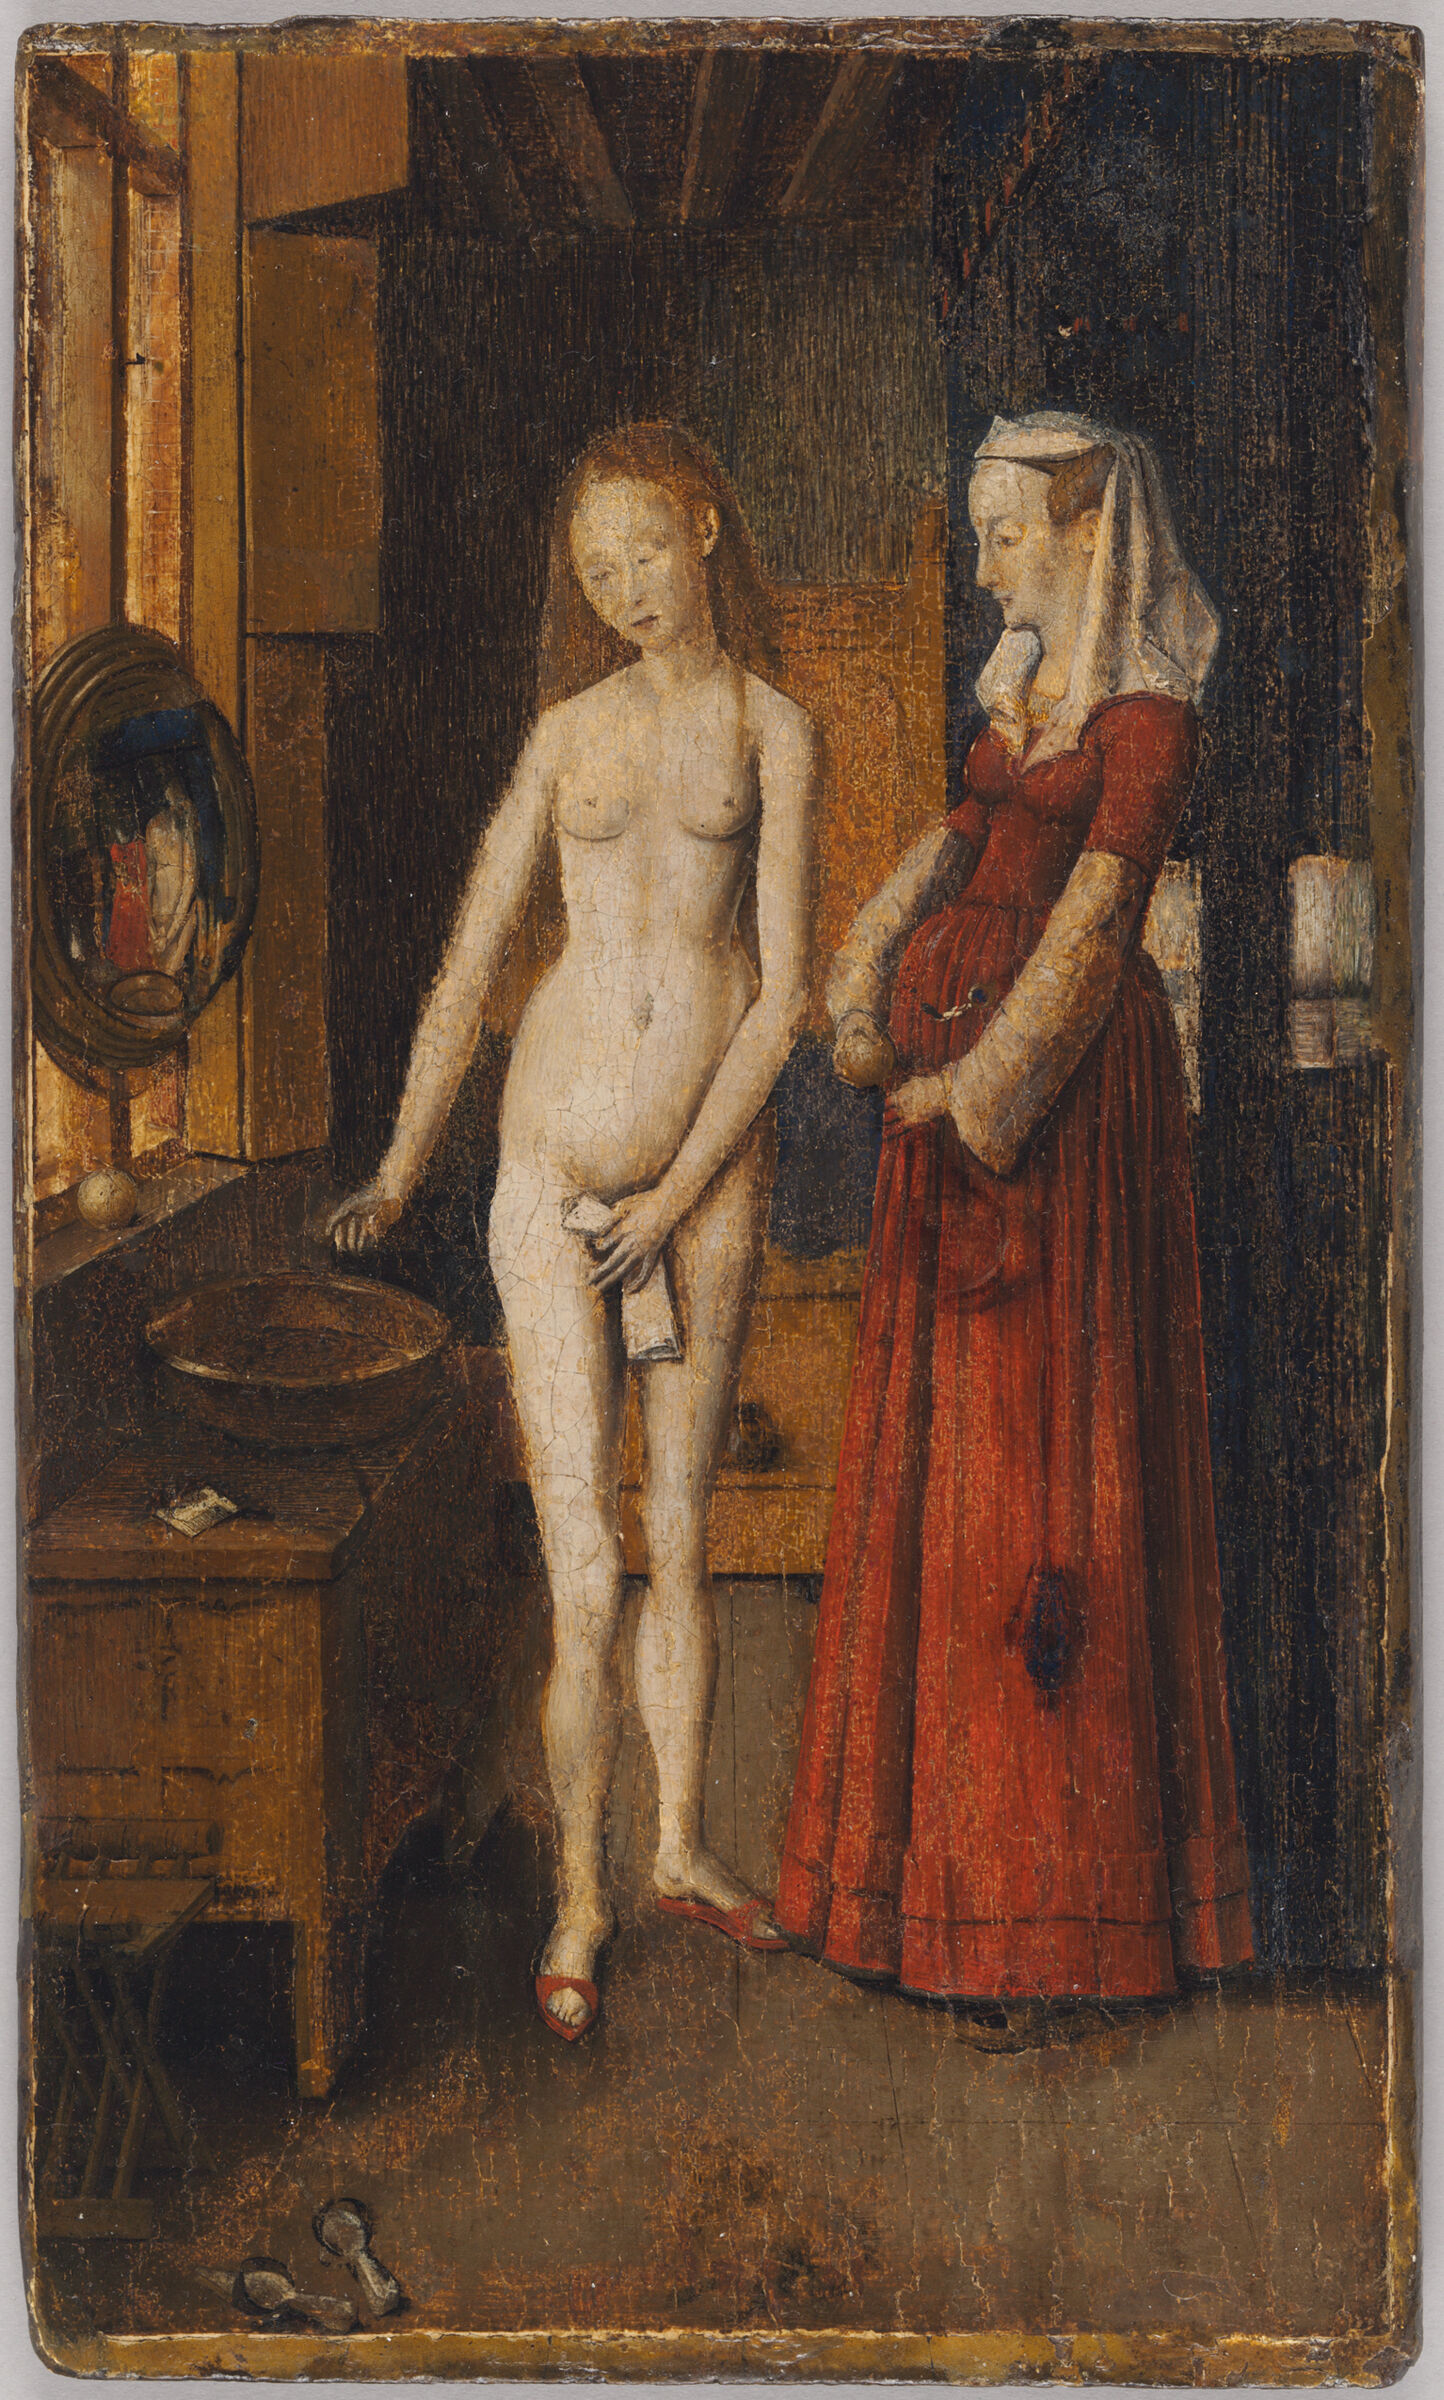 Woman At Her Toilet